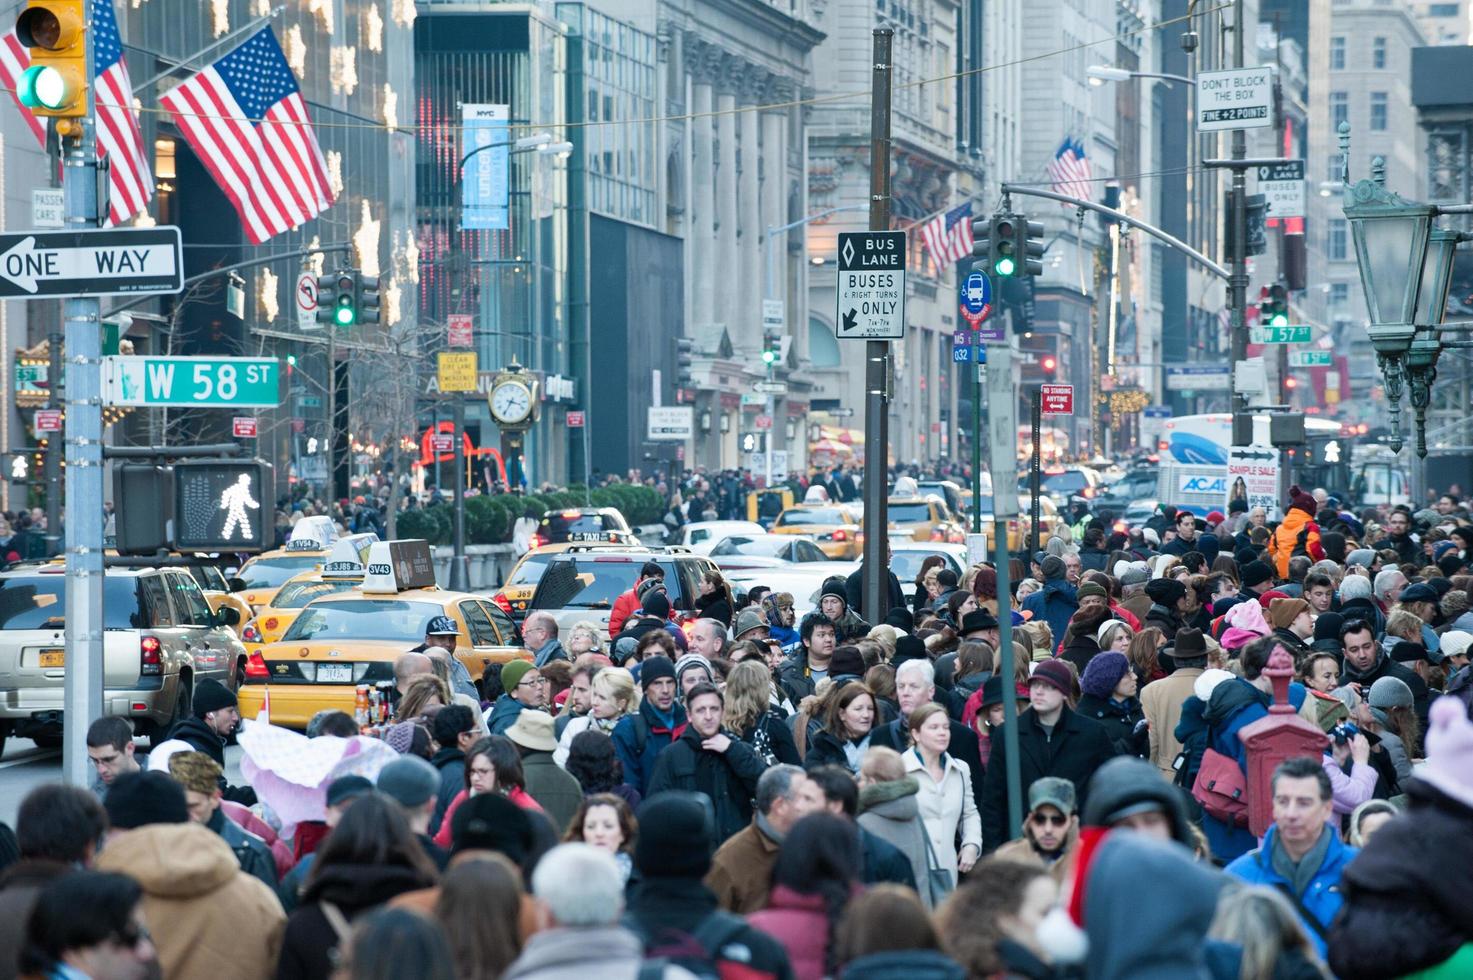 NEW YORK, USA - DECEMBER 11, 2011 - City streets are crowded of people for xmas photo